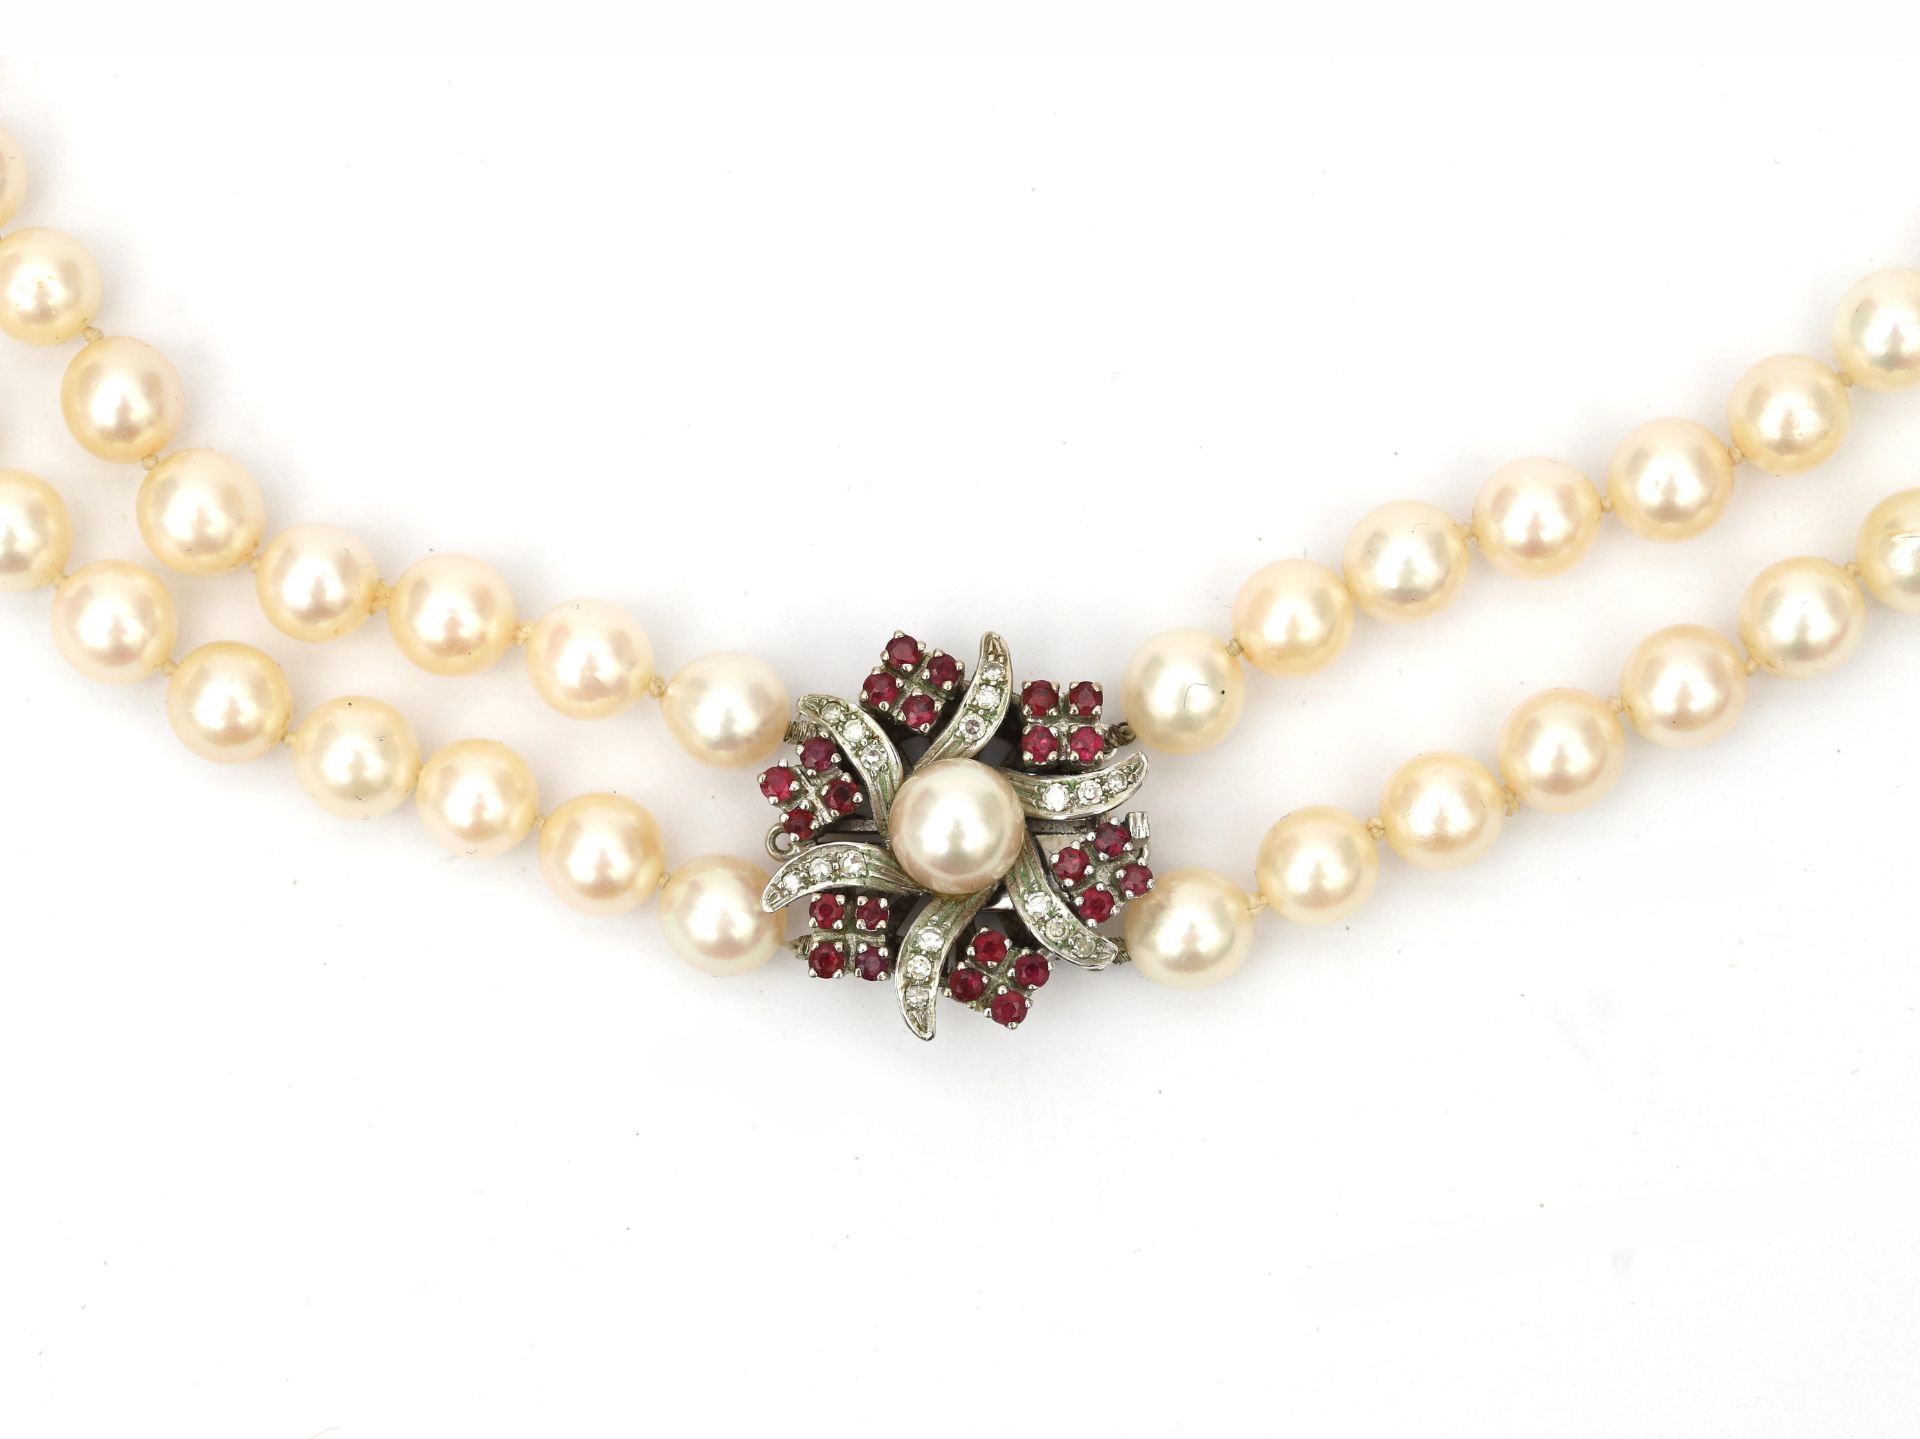 A cultured pearl necklace to a ruby and diamond white gold clasp. Featuring two knotted strands of